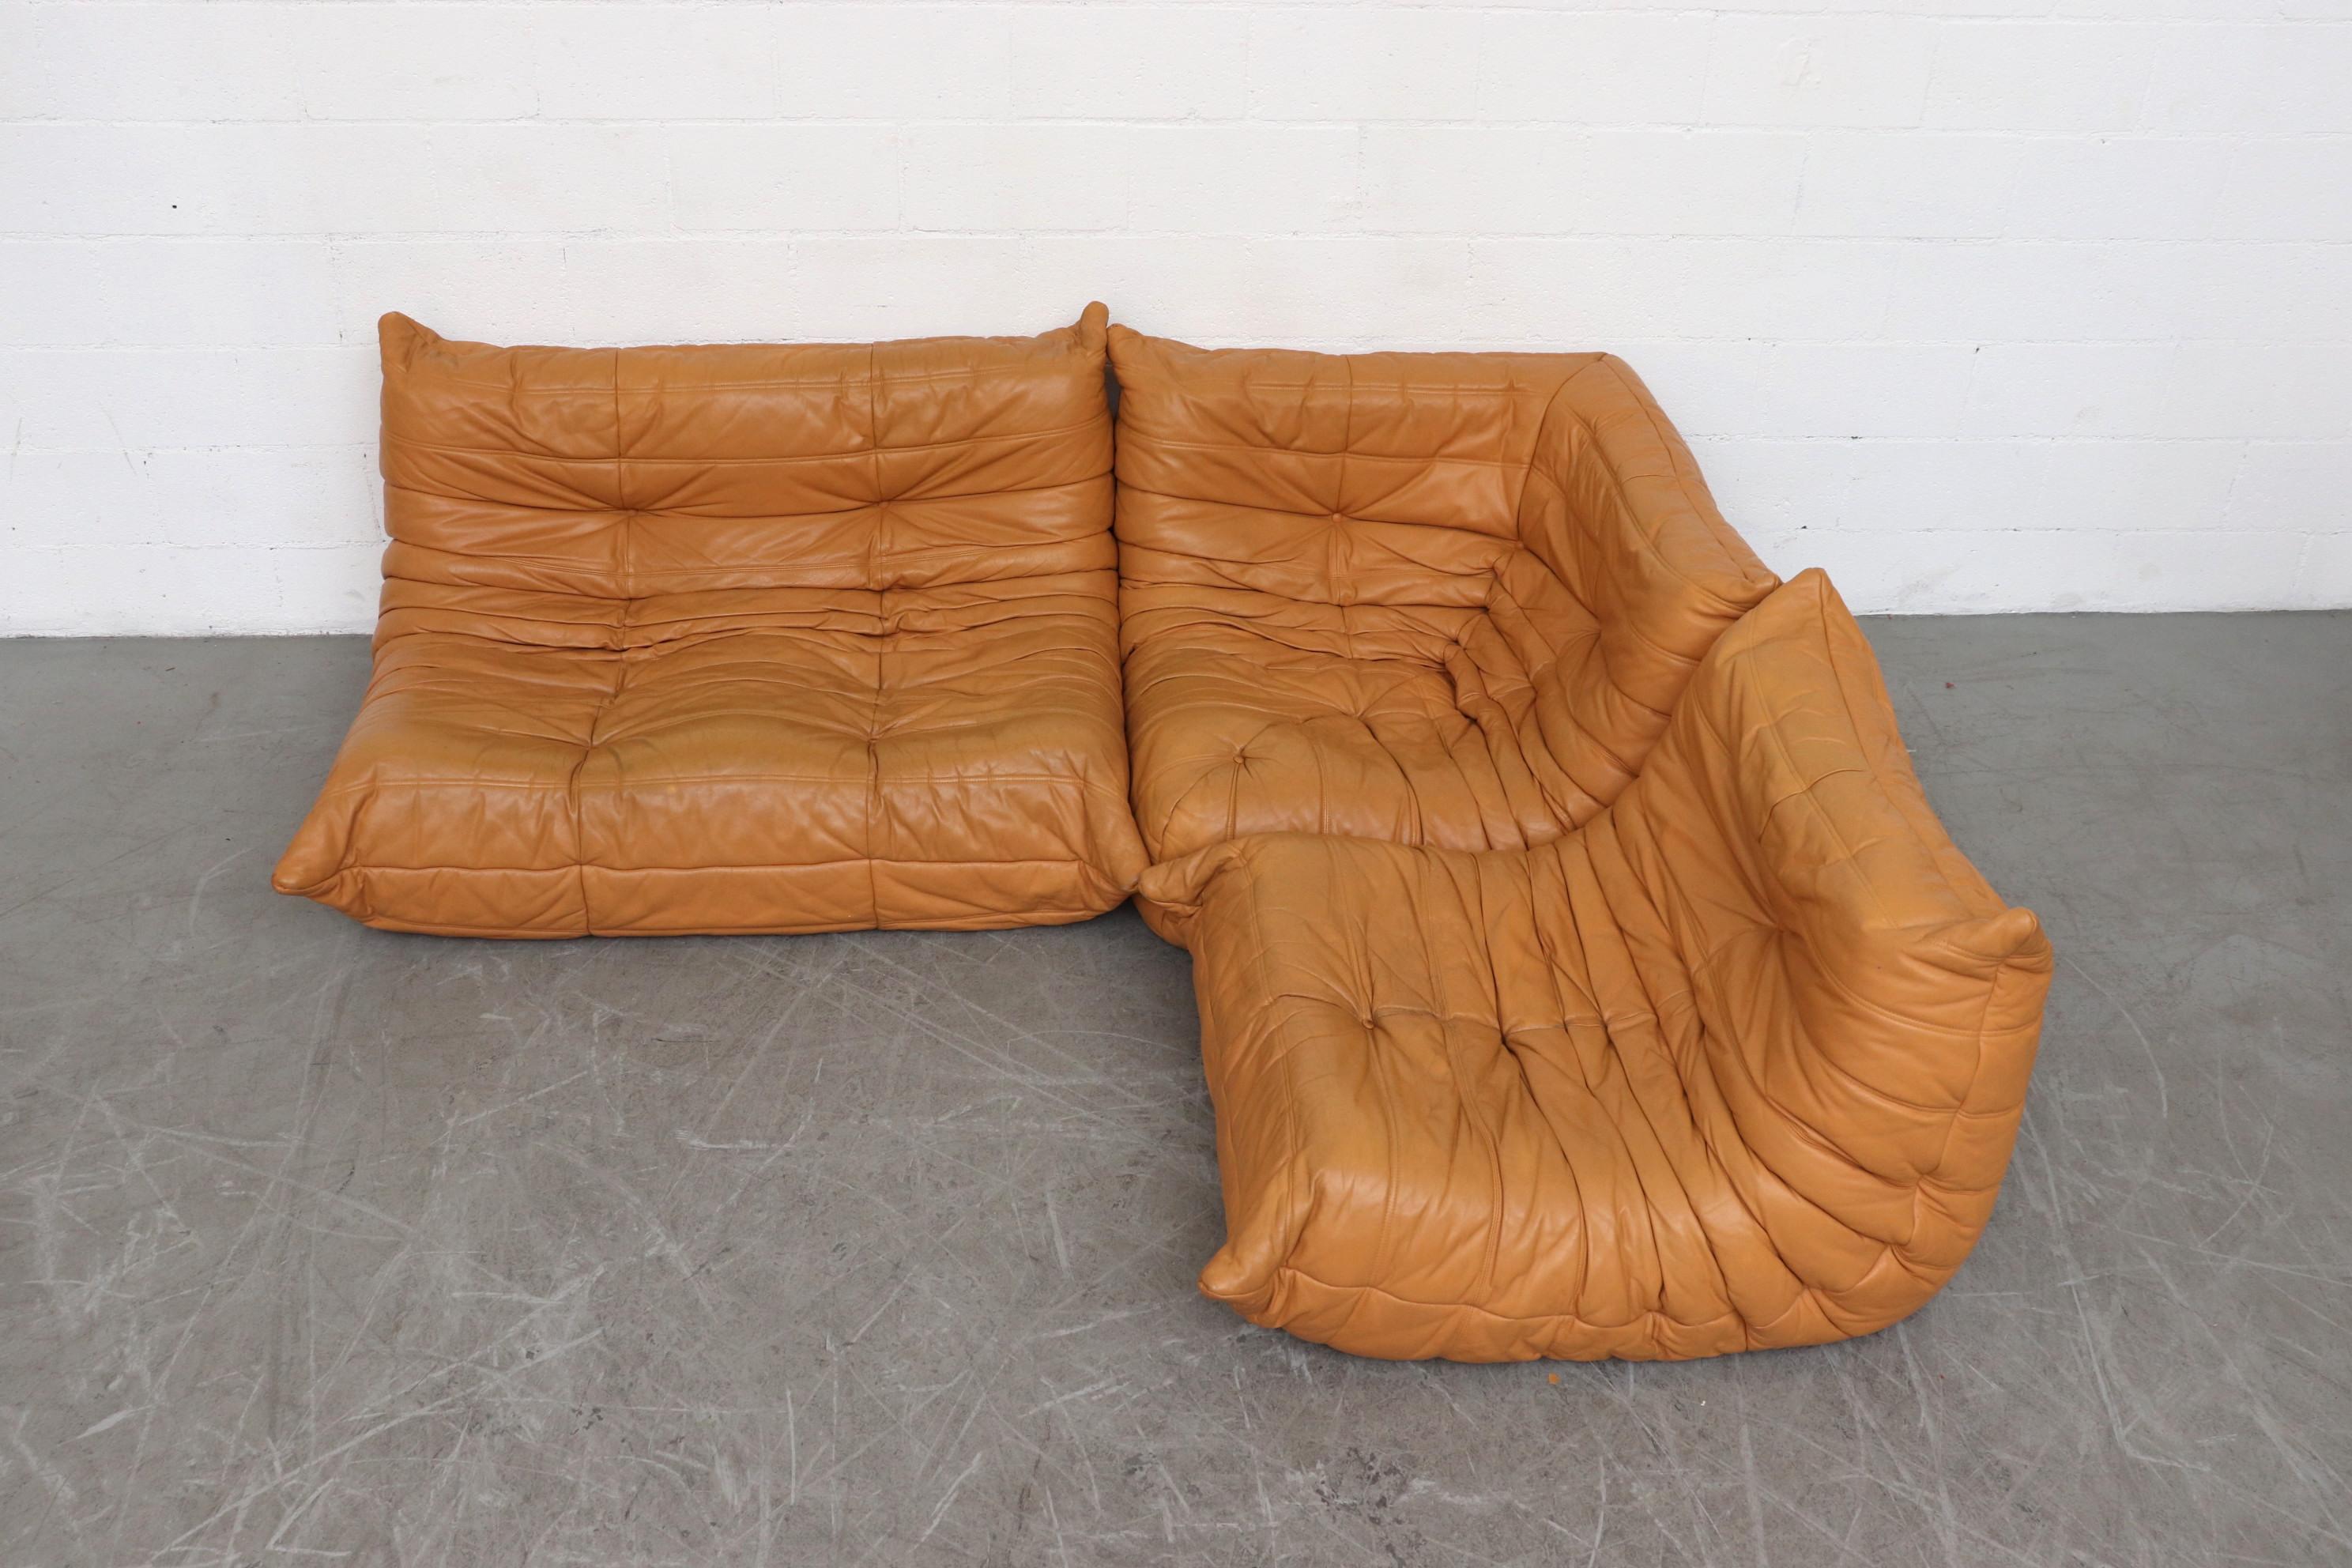 Ligne Roset 'TOGO' butterscotch leather sectional sofa. In good original condition with some signs of wear.